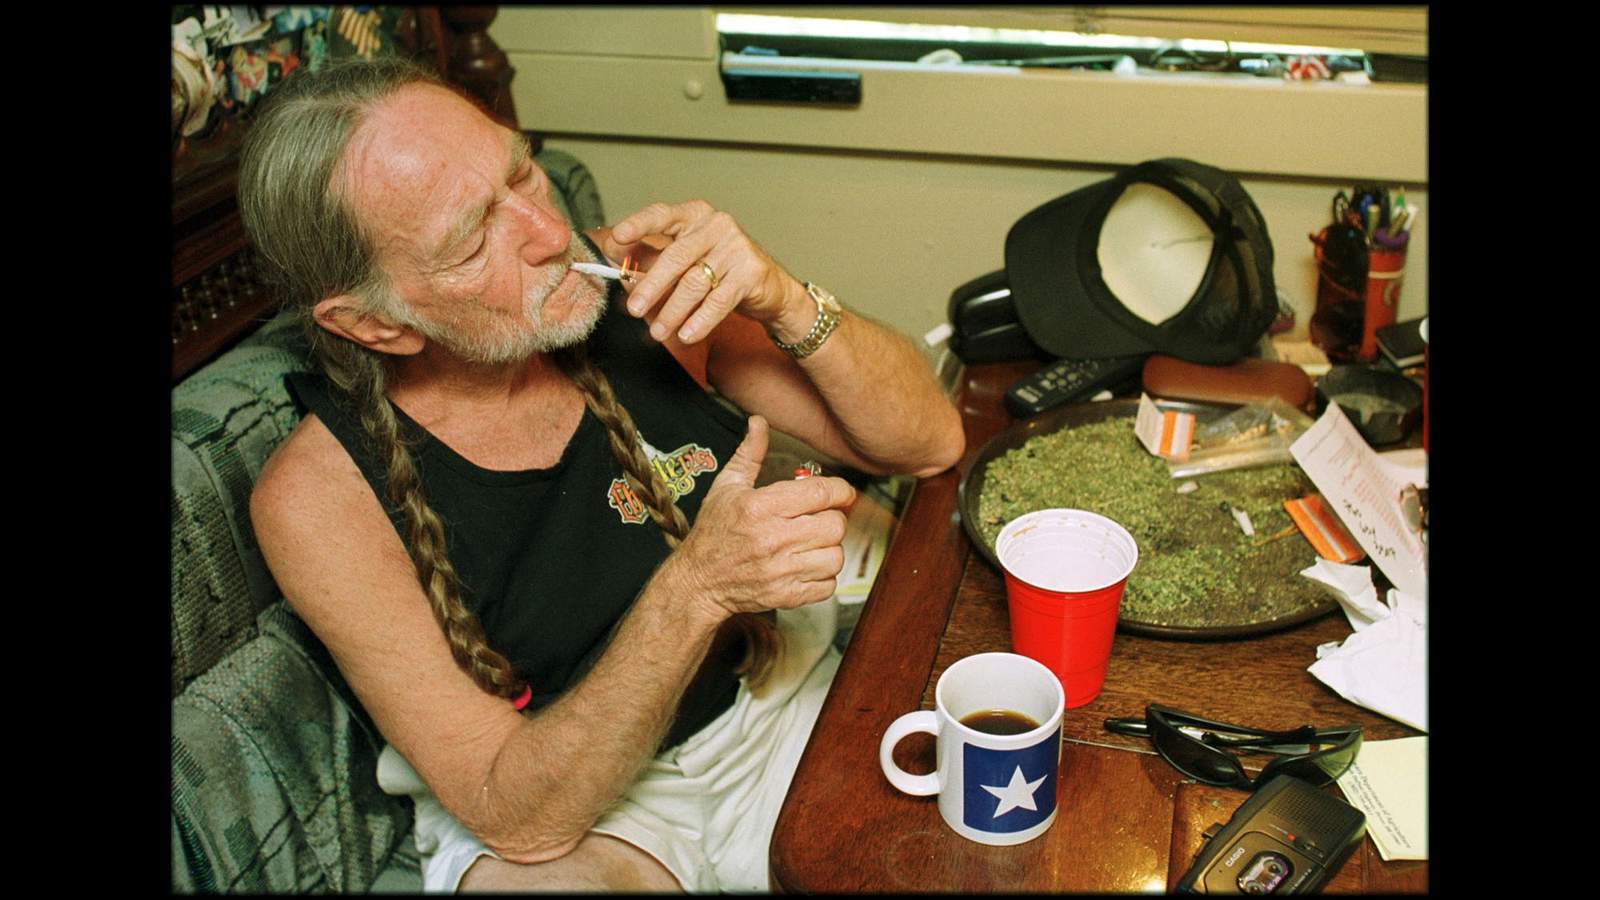 Willie Nelson hosting ‘Come and Toke It’ variety show on 4/20